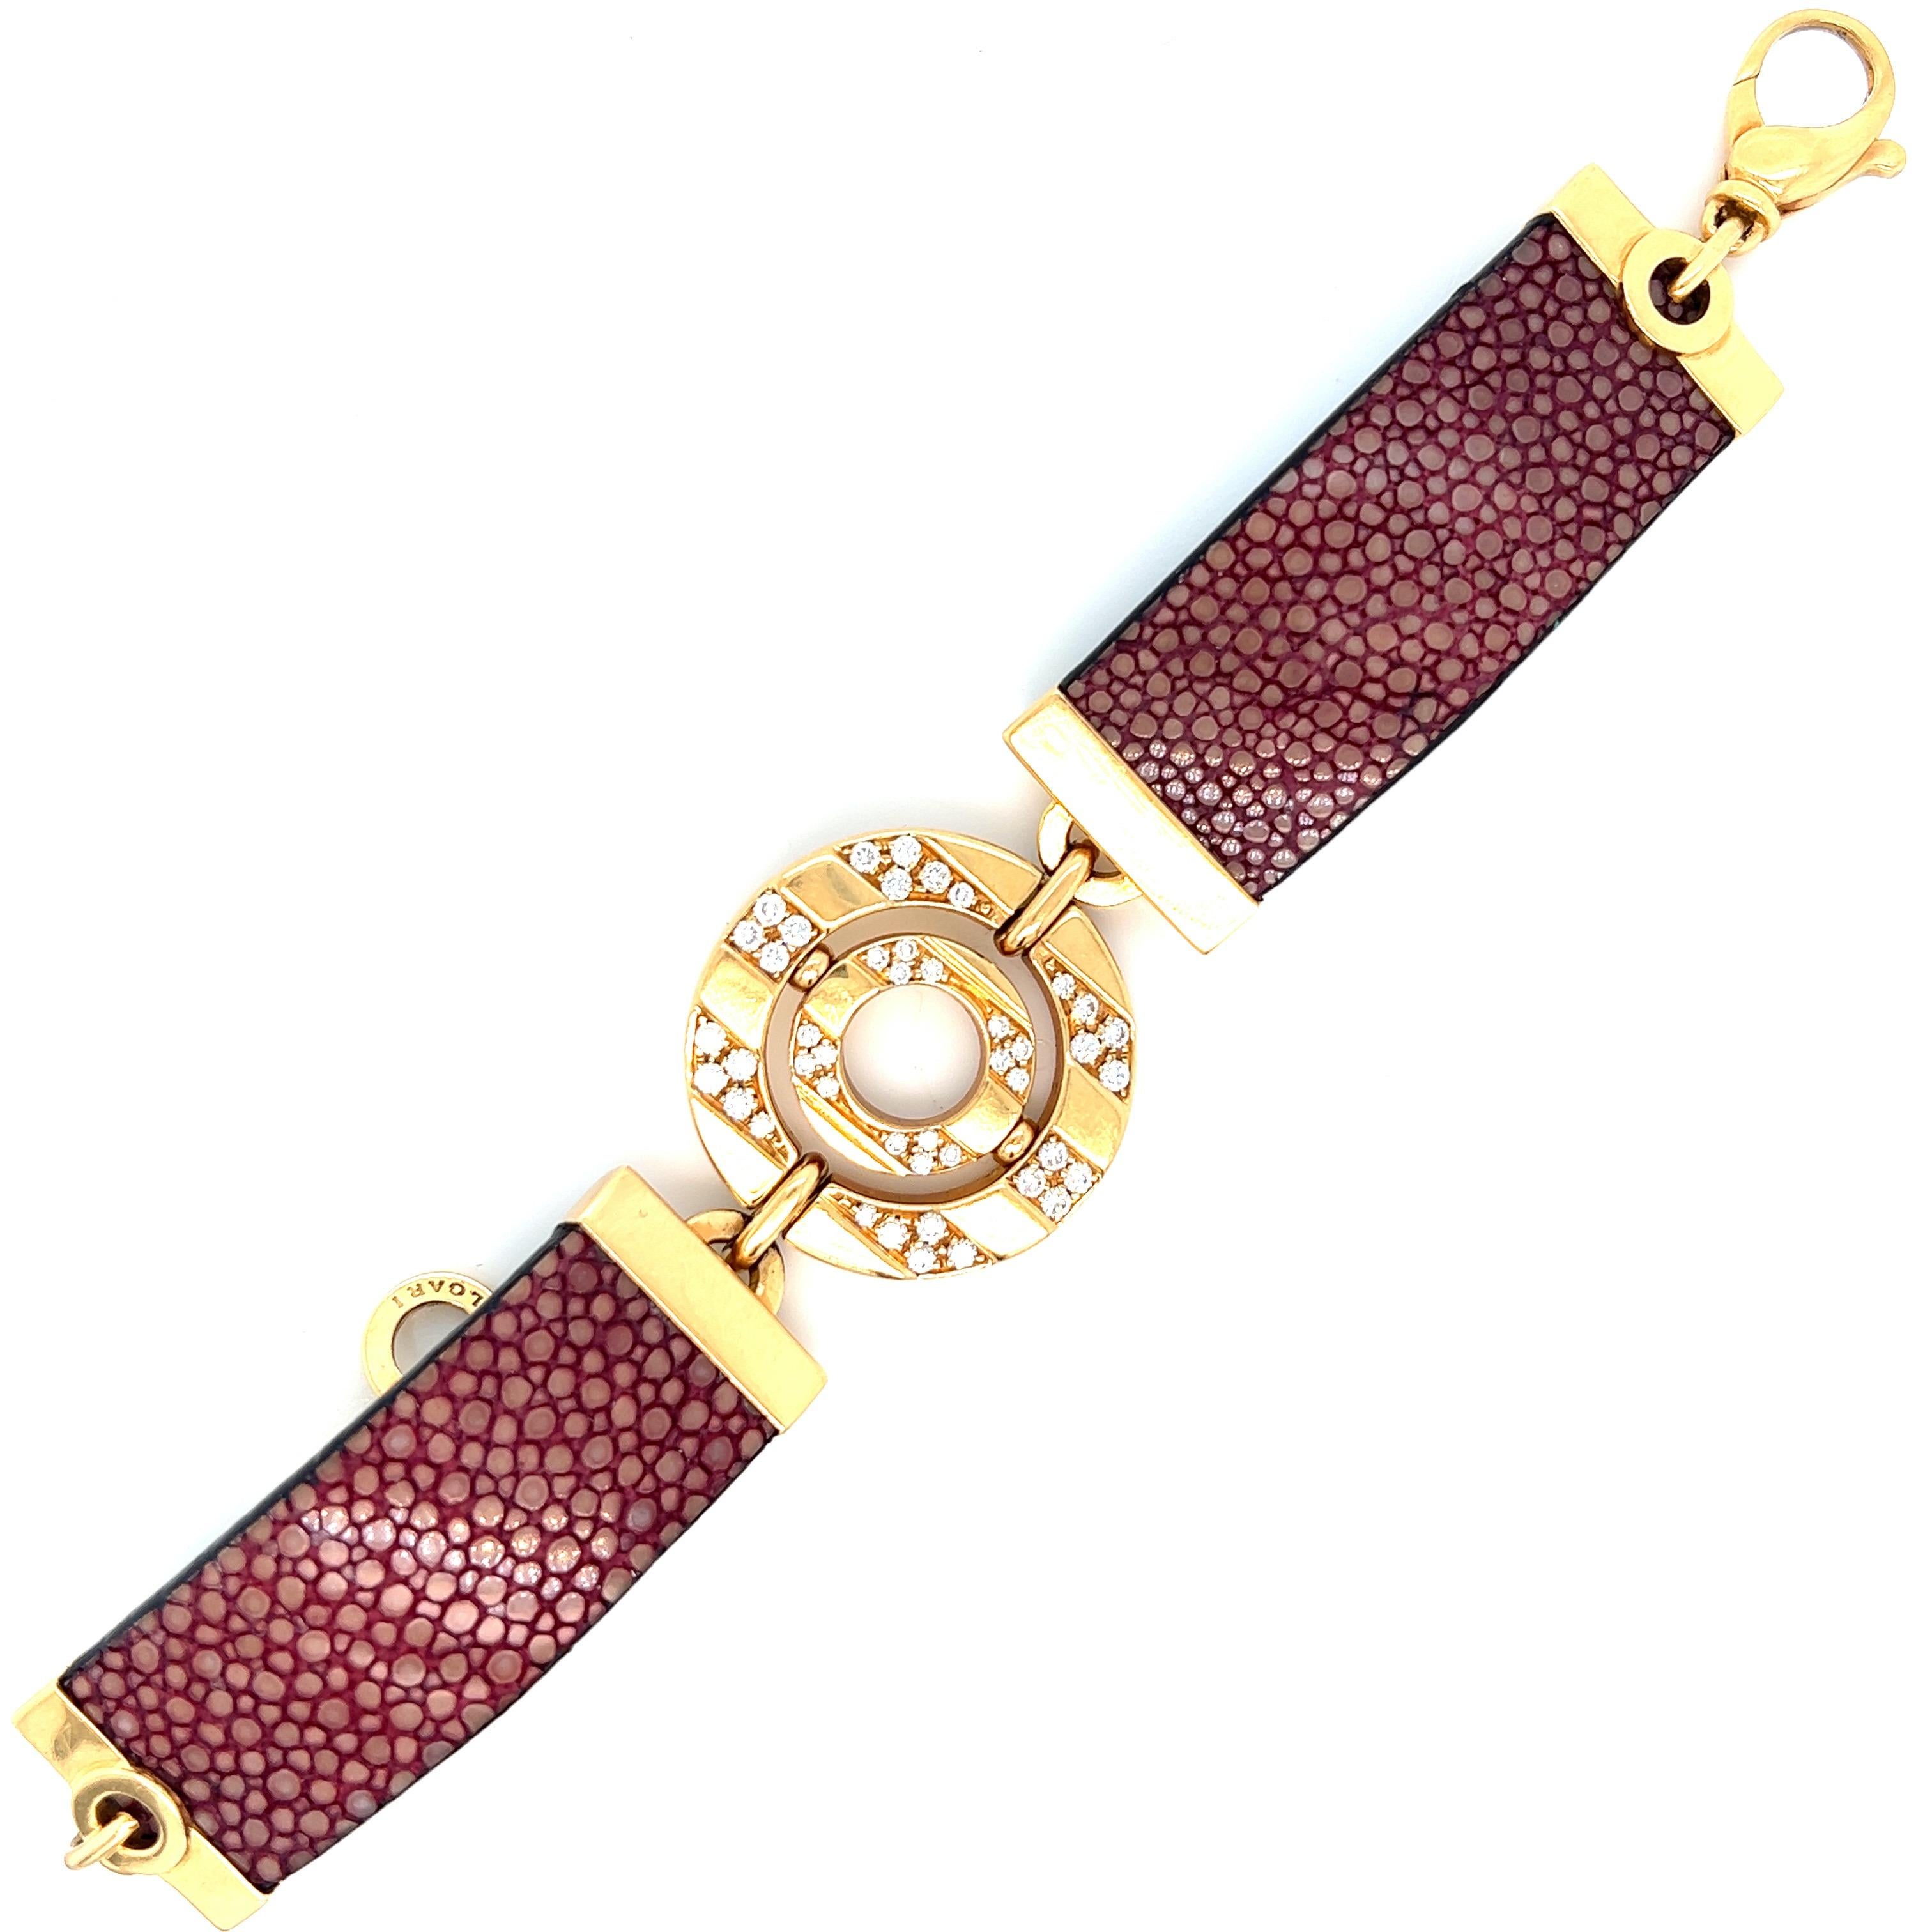 Bvlgari 18 karat yellow gold bracelet with leather straps and diamonds weighing approximately 1 carat. Marked: Bvlgari / 750 / 2331 V1 / Made in Italy. Total weight: 48.1 grams. Width: 1.13 inch. Length: 8 inches. 